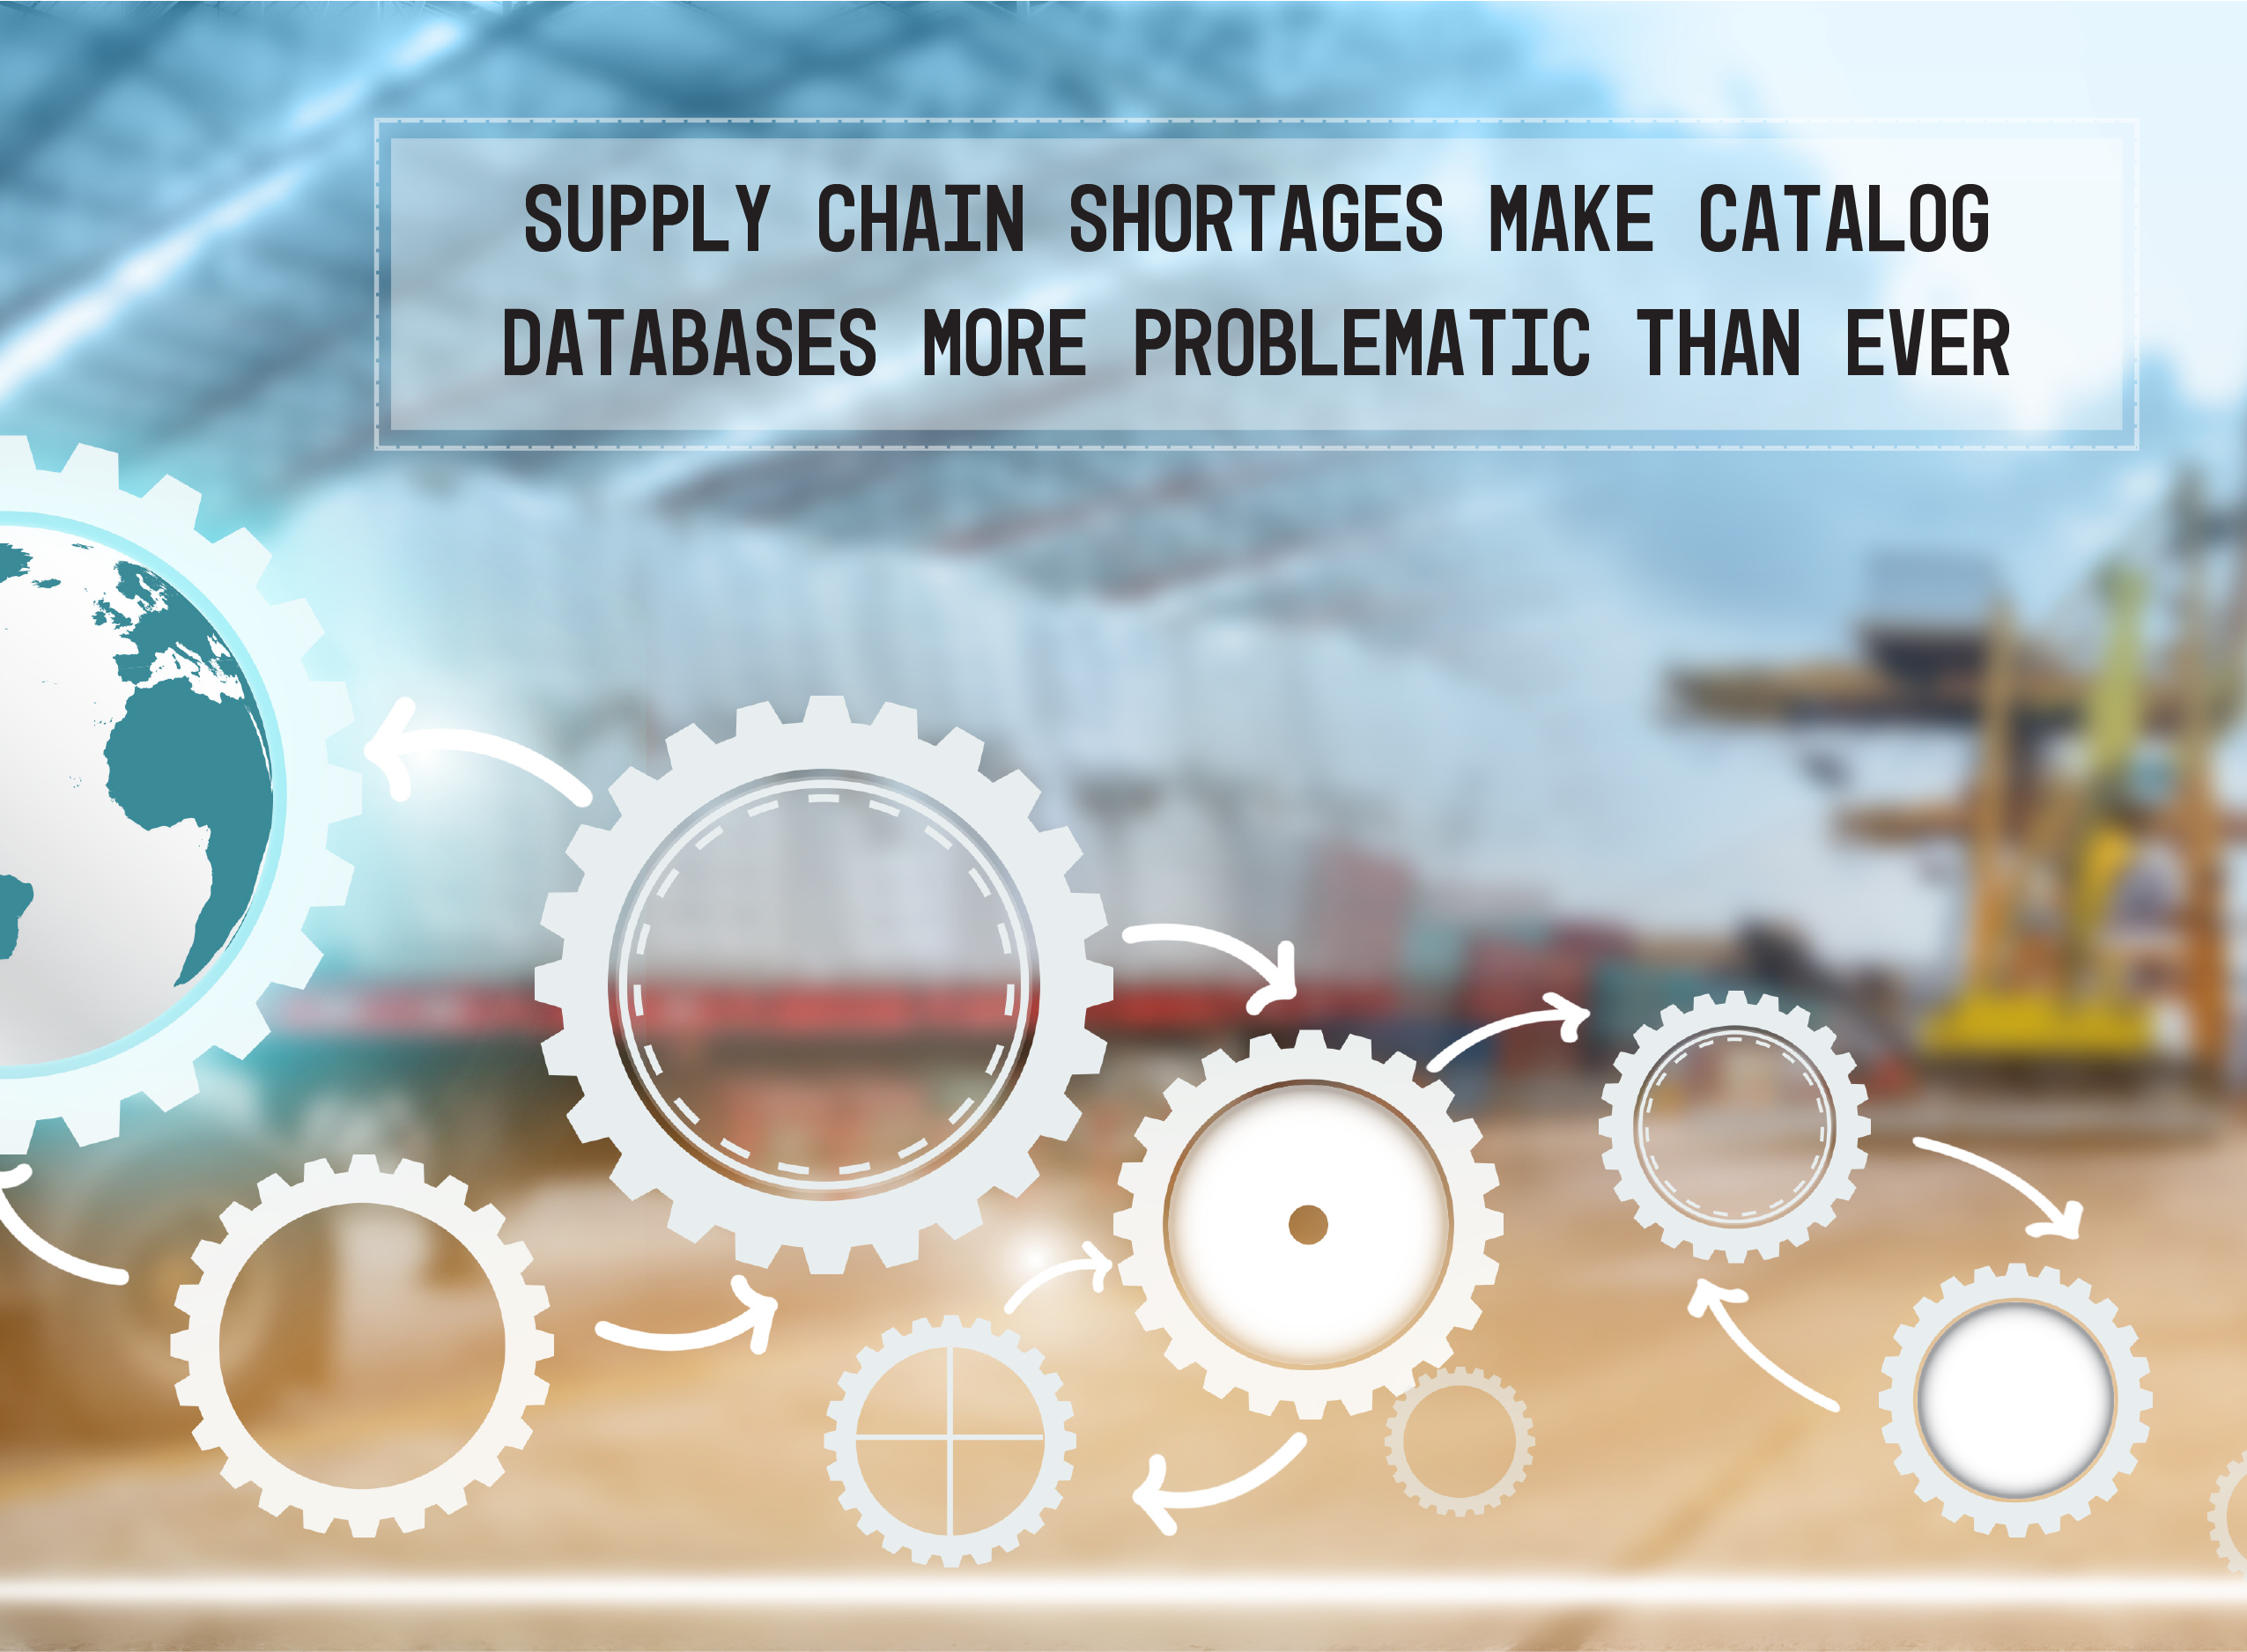 Supply Chain Shortages Make Catalog Databases More Problematic Than Ever